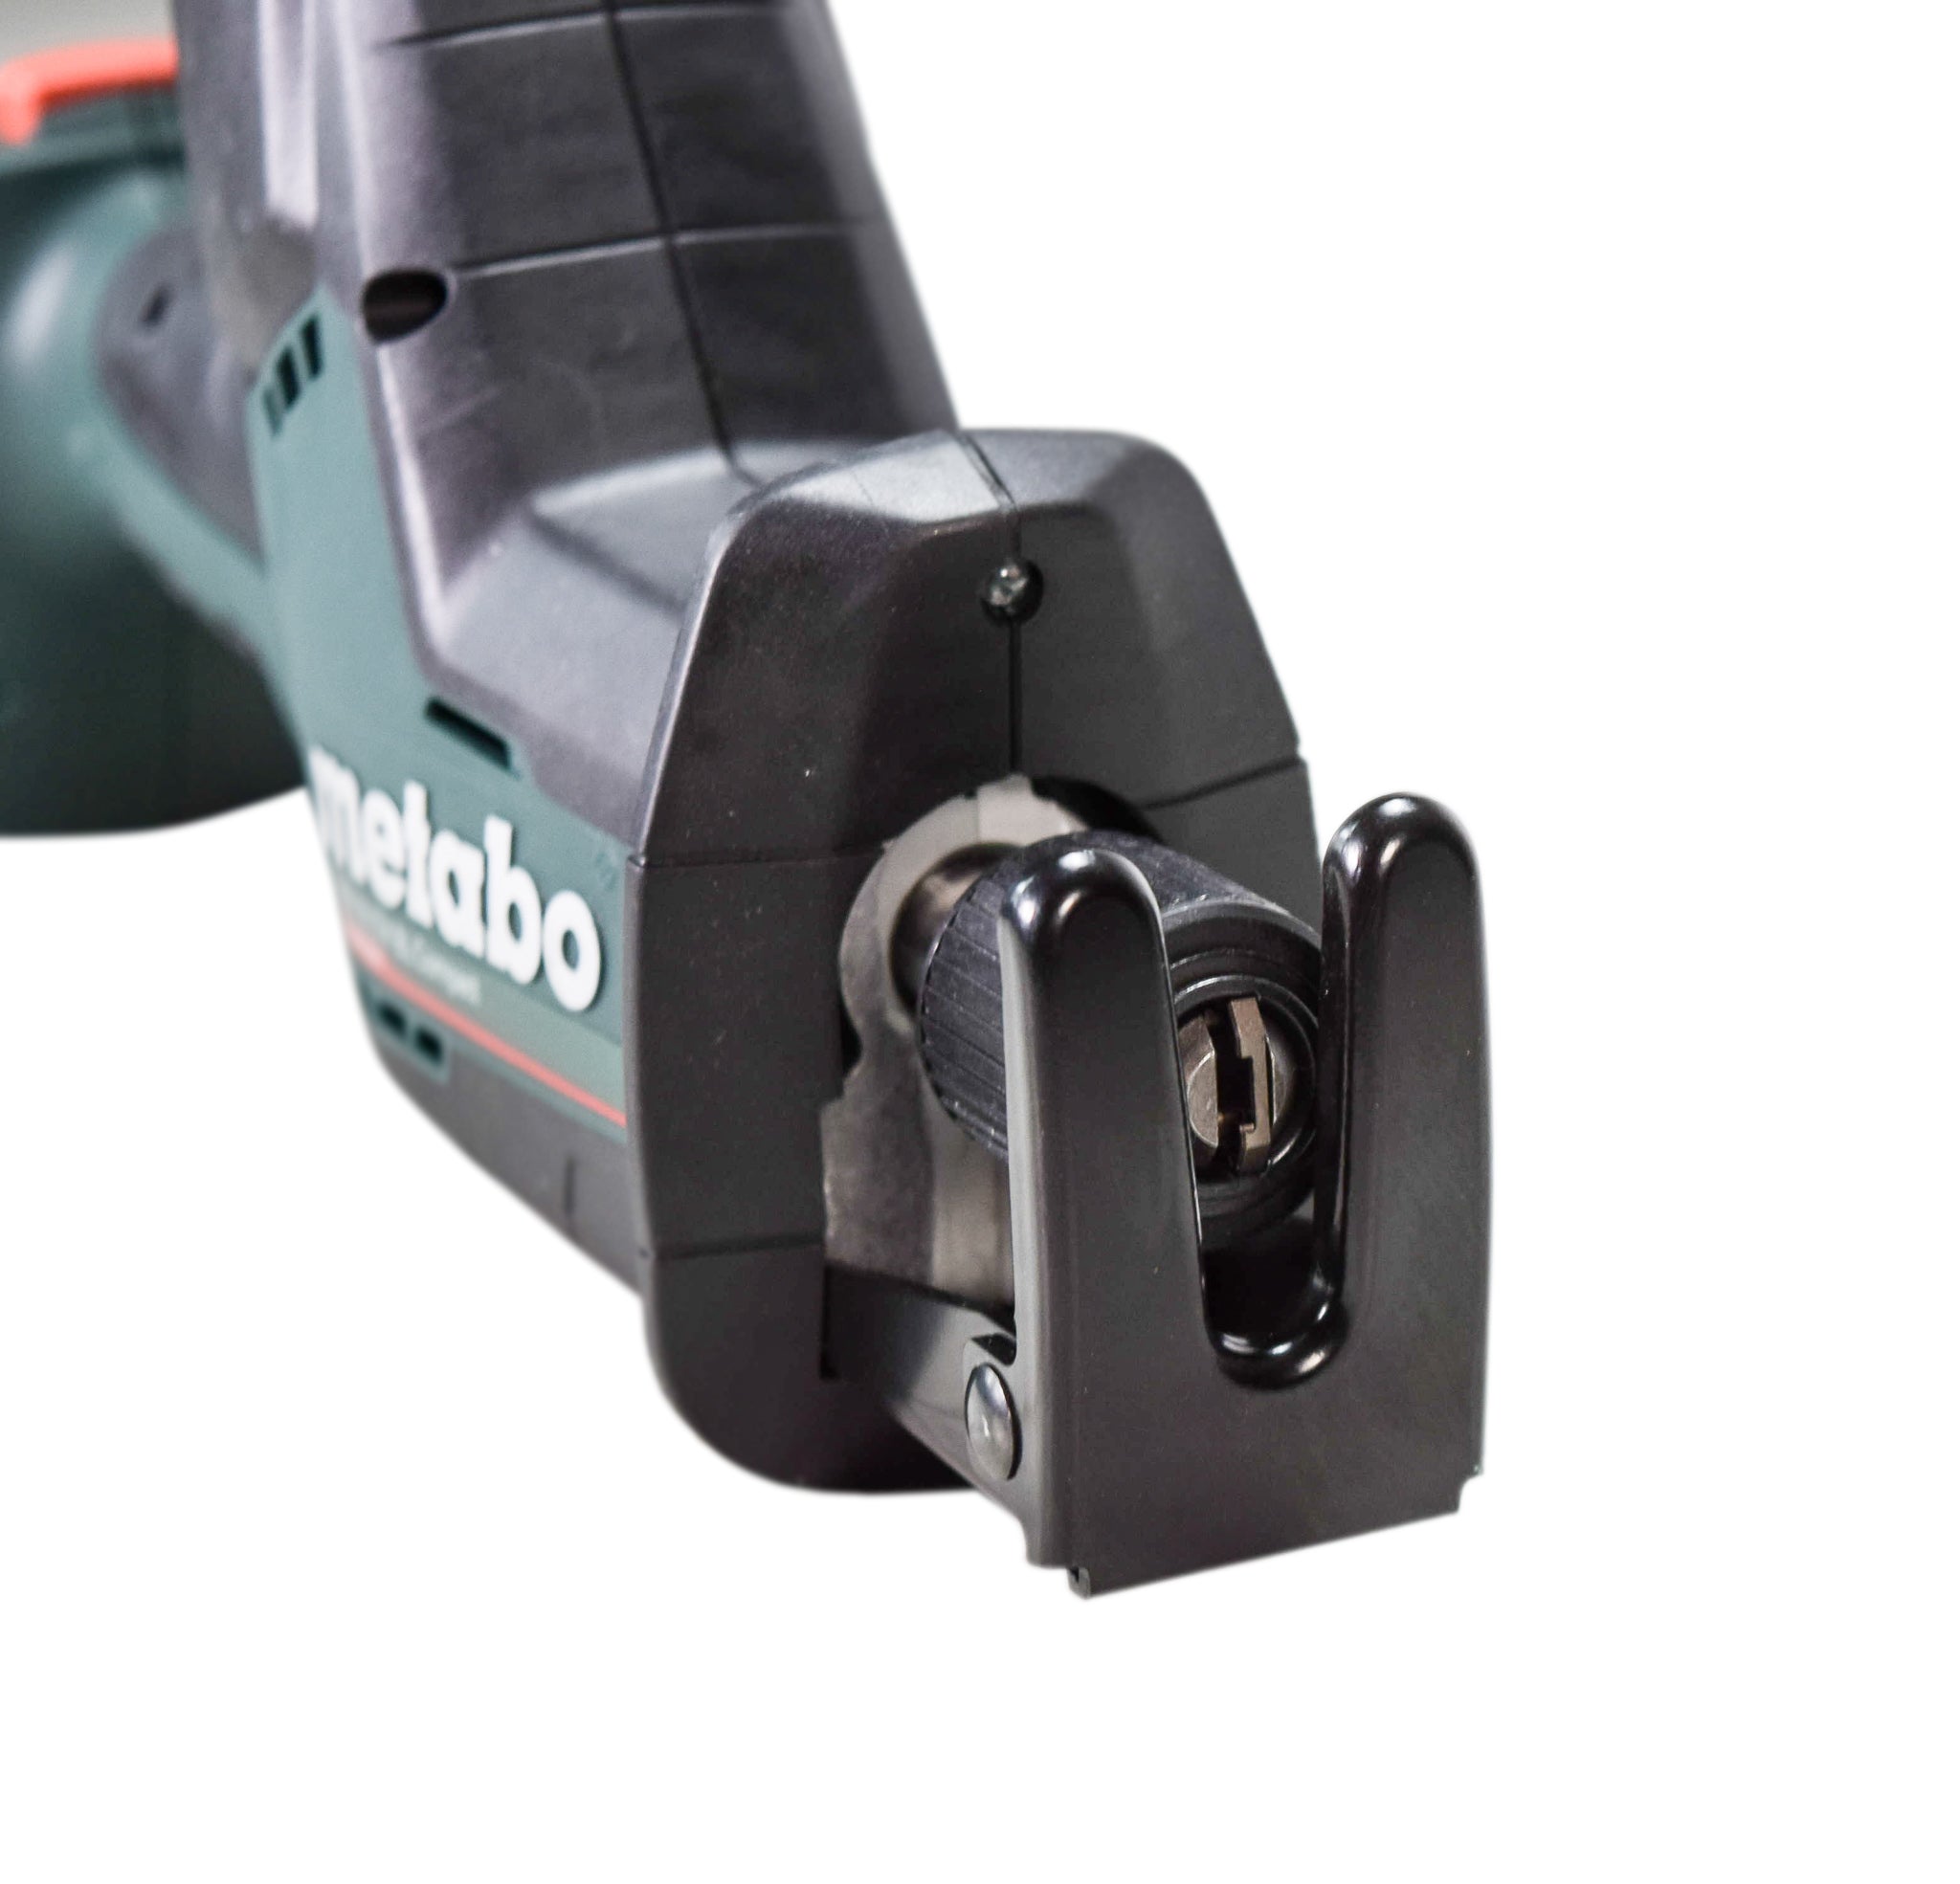 Metabo 602366840 18 LTX SSE BL 18V Cordless Compact Reciprocating Saw (Tool Only)